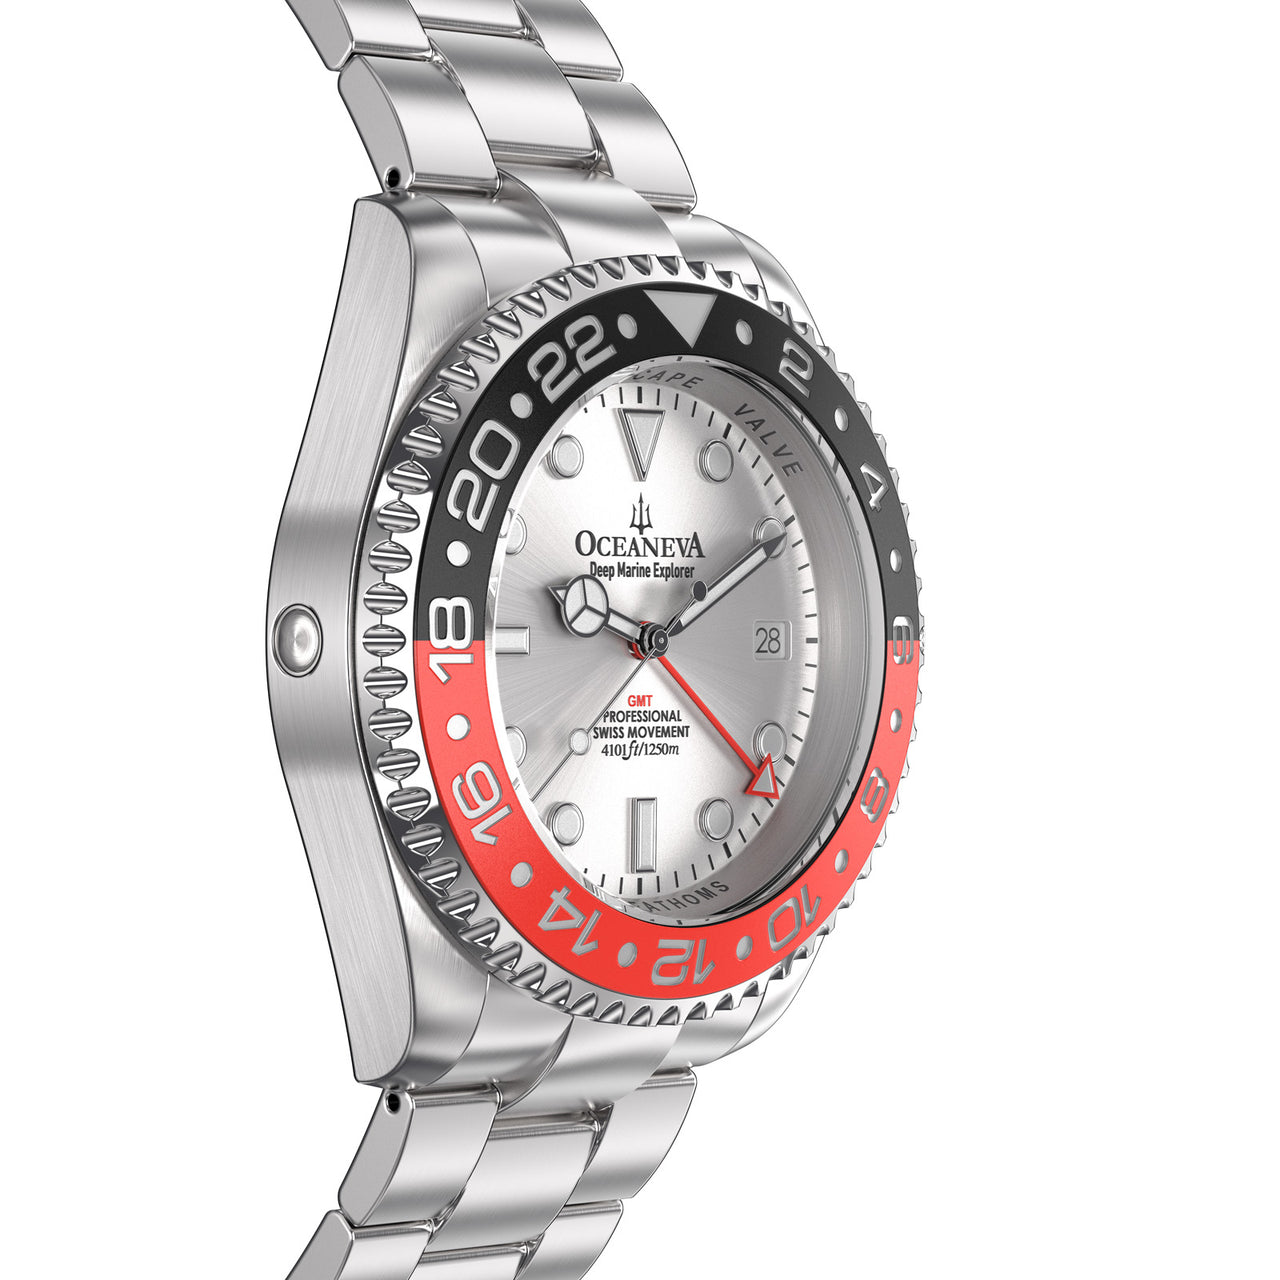 Oceaneva 1250M GMT Dive Watch Silver Red And Black Side Helium Escape Valve View